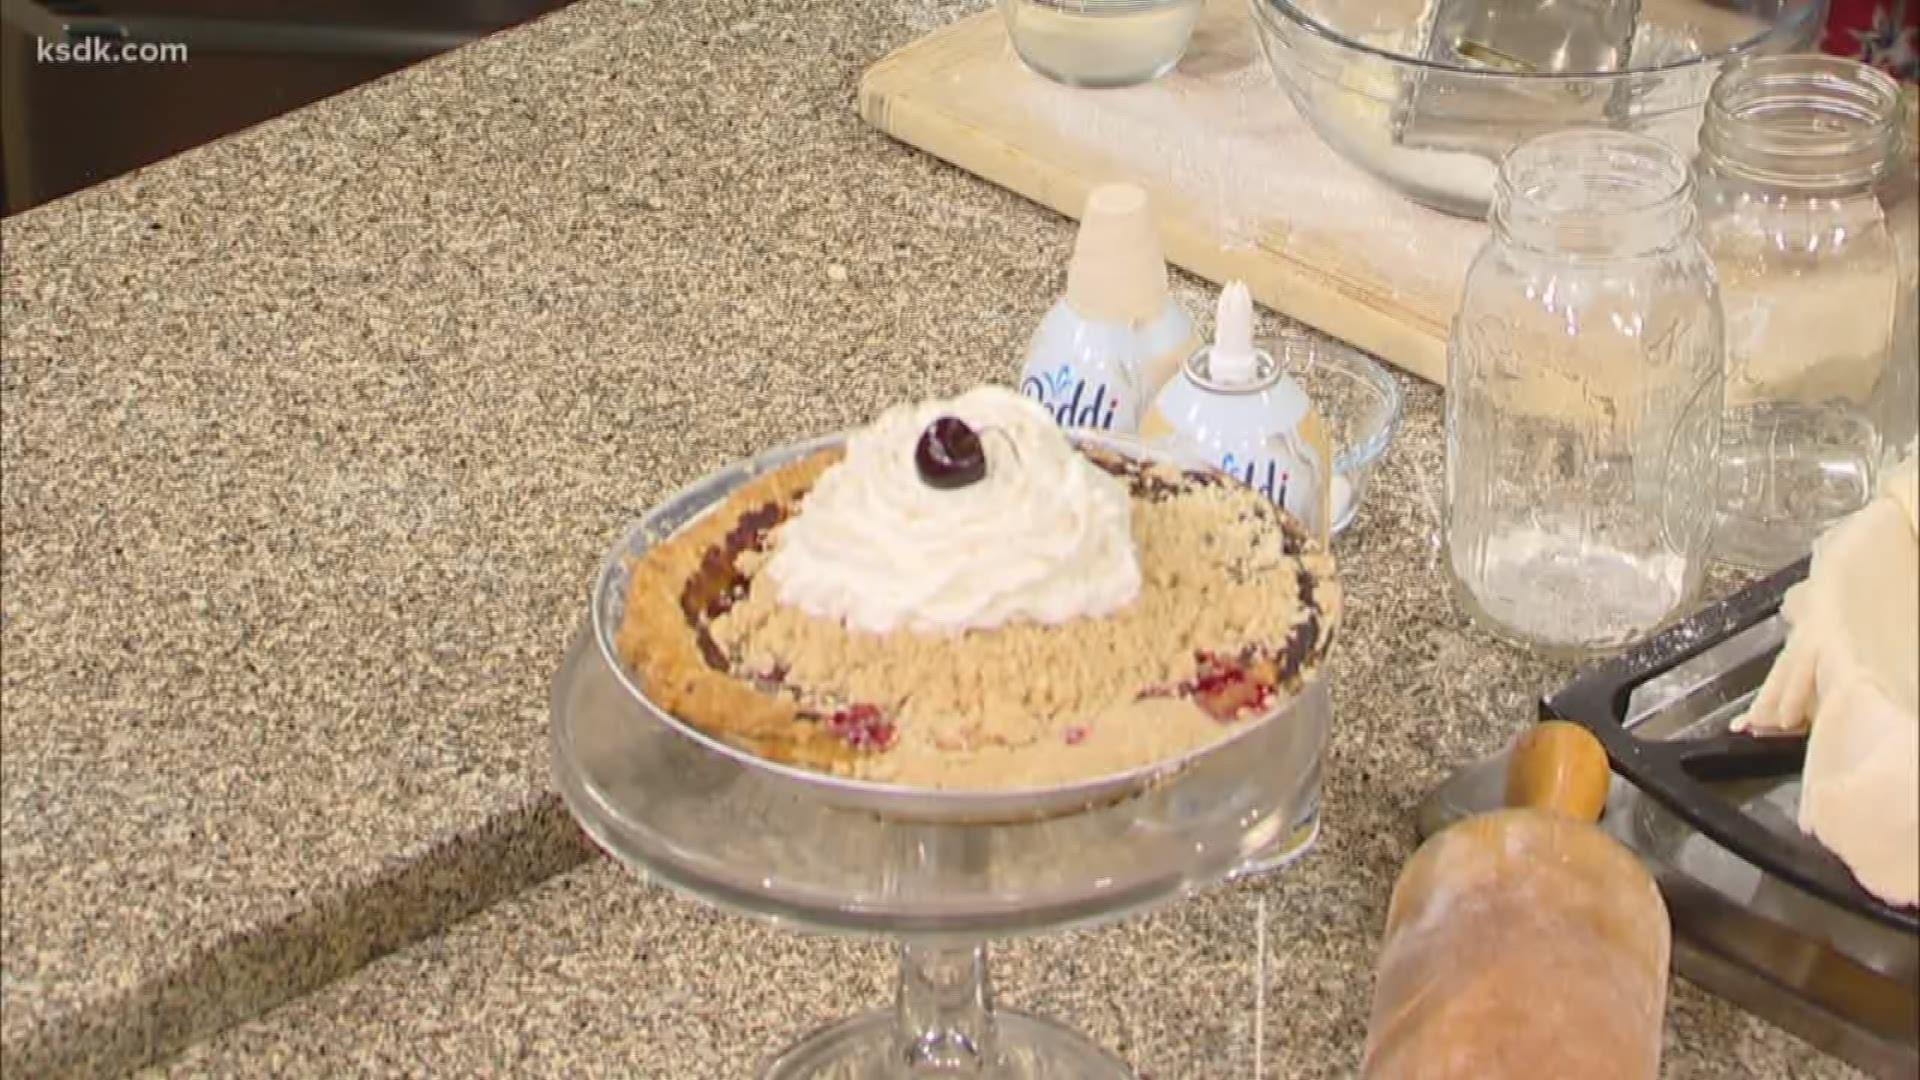 Chef Liz Schuster of Tenacious Eats shares a recipe in honor of National Cherry Pie Day.